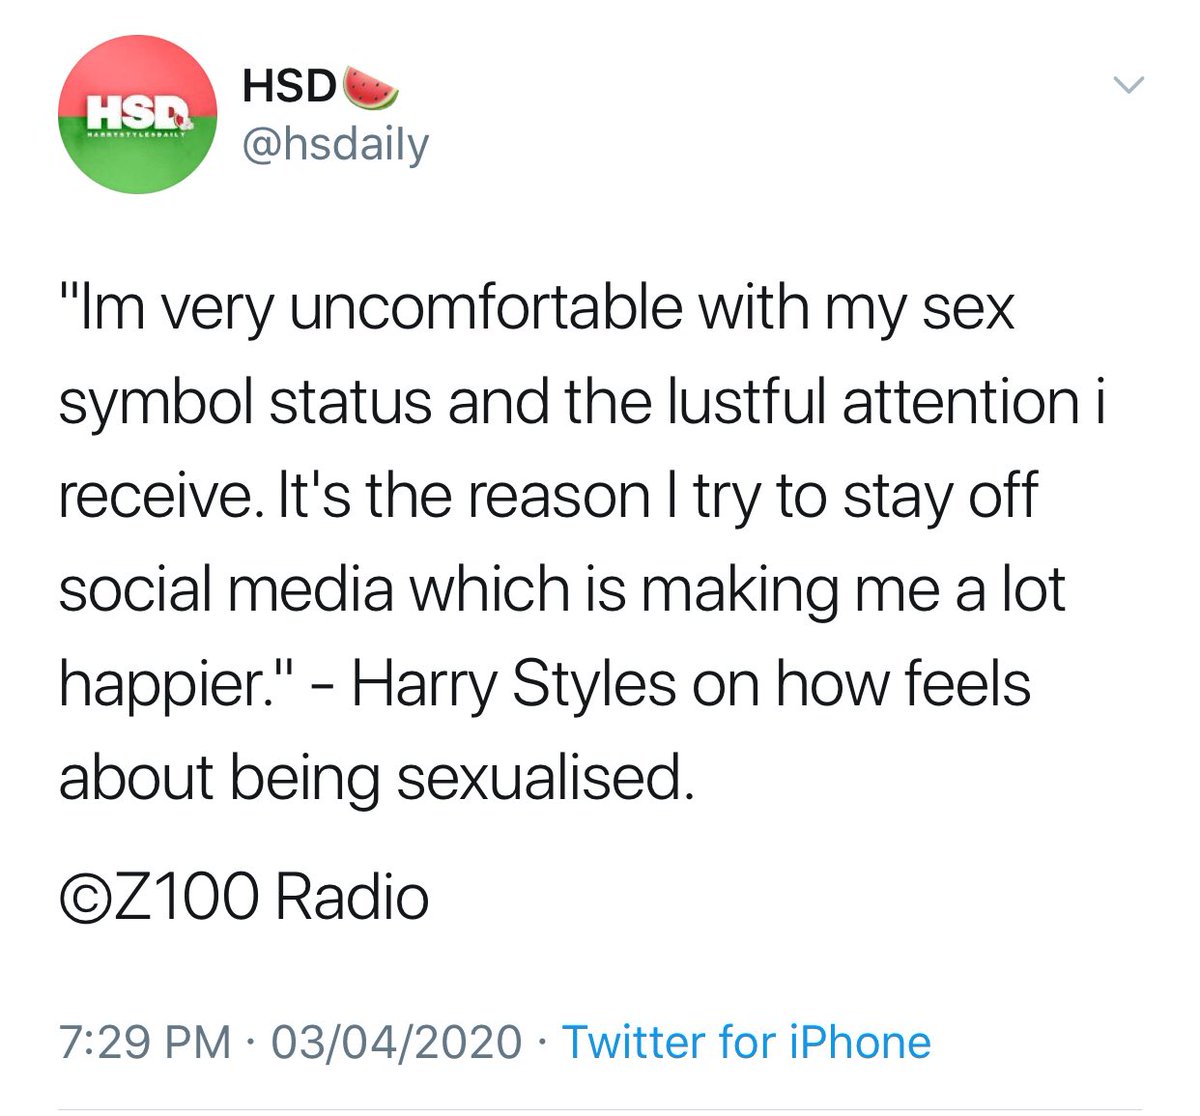 First let’s dissect the #1 thing that ot5/larries love to bring up when discussing us “sexualising”. This quote from hsd (attached). Listen closely when I say this: THIS QUOTE IS FAKE. THE ACCOUNT IS FAKE ITS NOT THE REAL HSD. THESE WORDS NEVER LEFT HARRYS MOUTH.